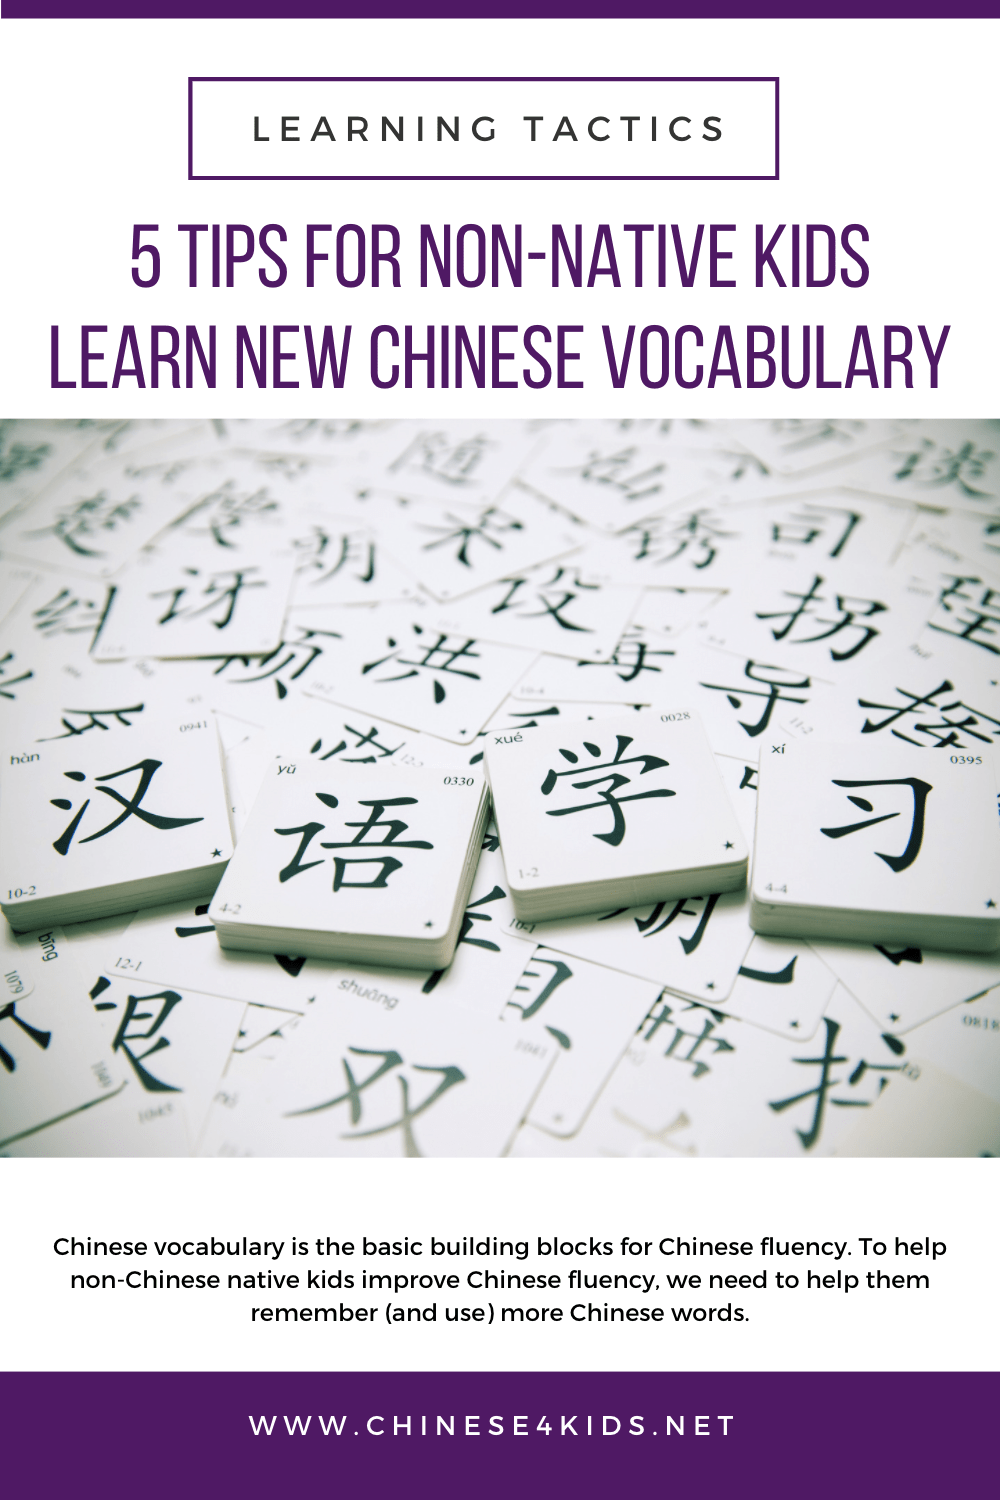 5 tips for non-native kids learn Chinese new vocabulary #Chinese4kids #learnChinese #Chineseforkids #mandarinChinese #Chinesevocabulary #Chineselearningtips